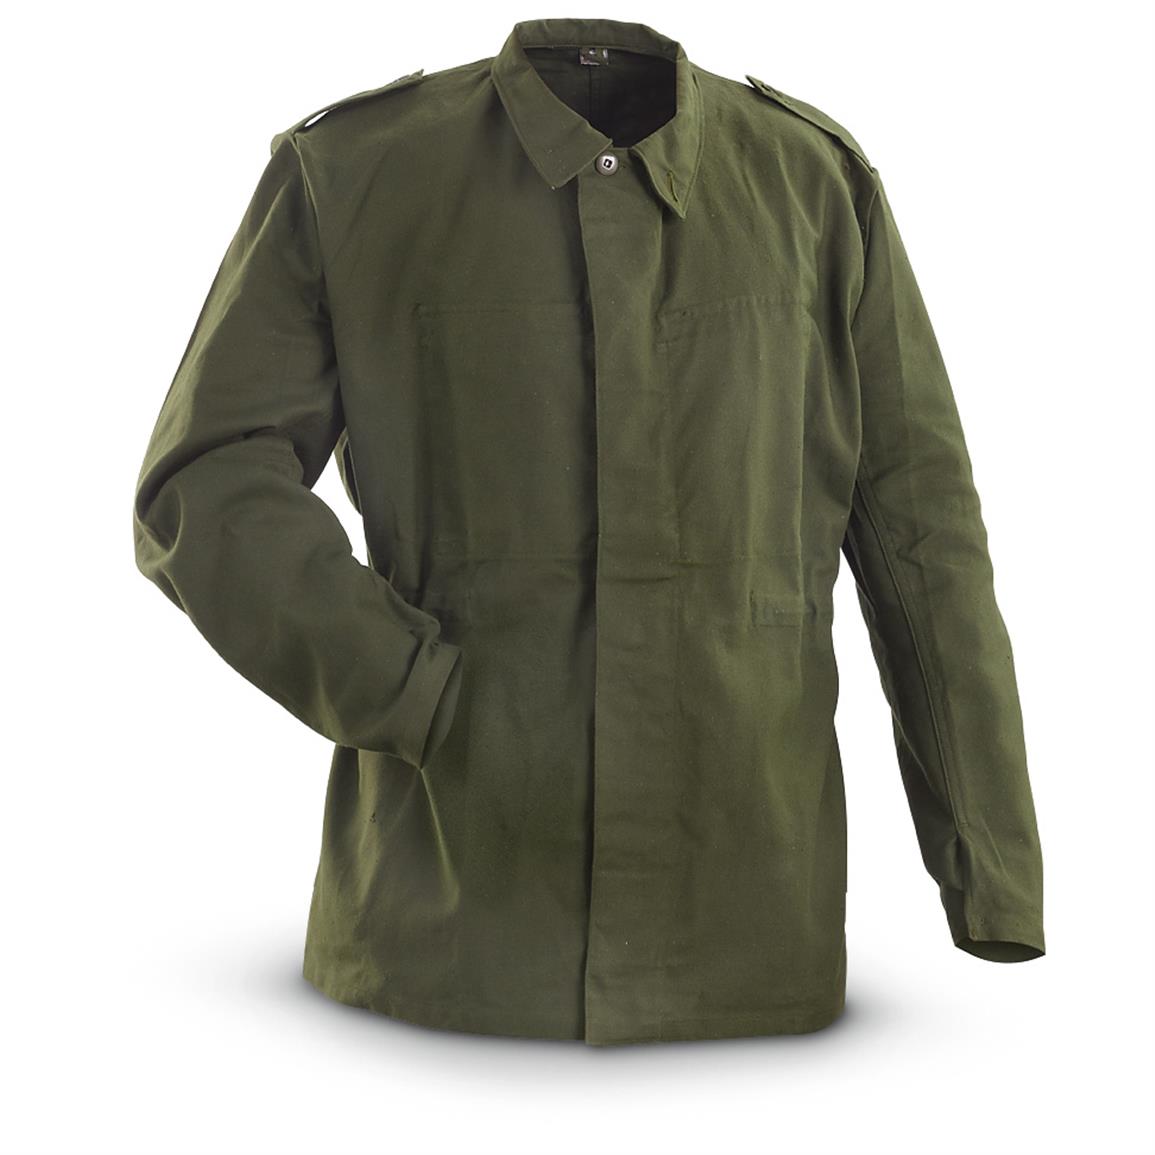 New Swedish Military Surplus Air Force Jacket - 584531, Uninsulated ...